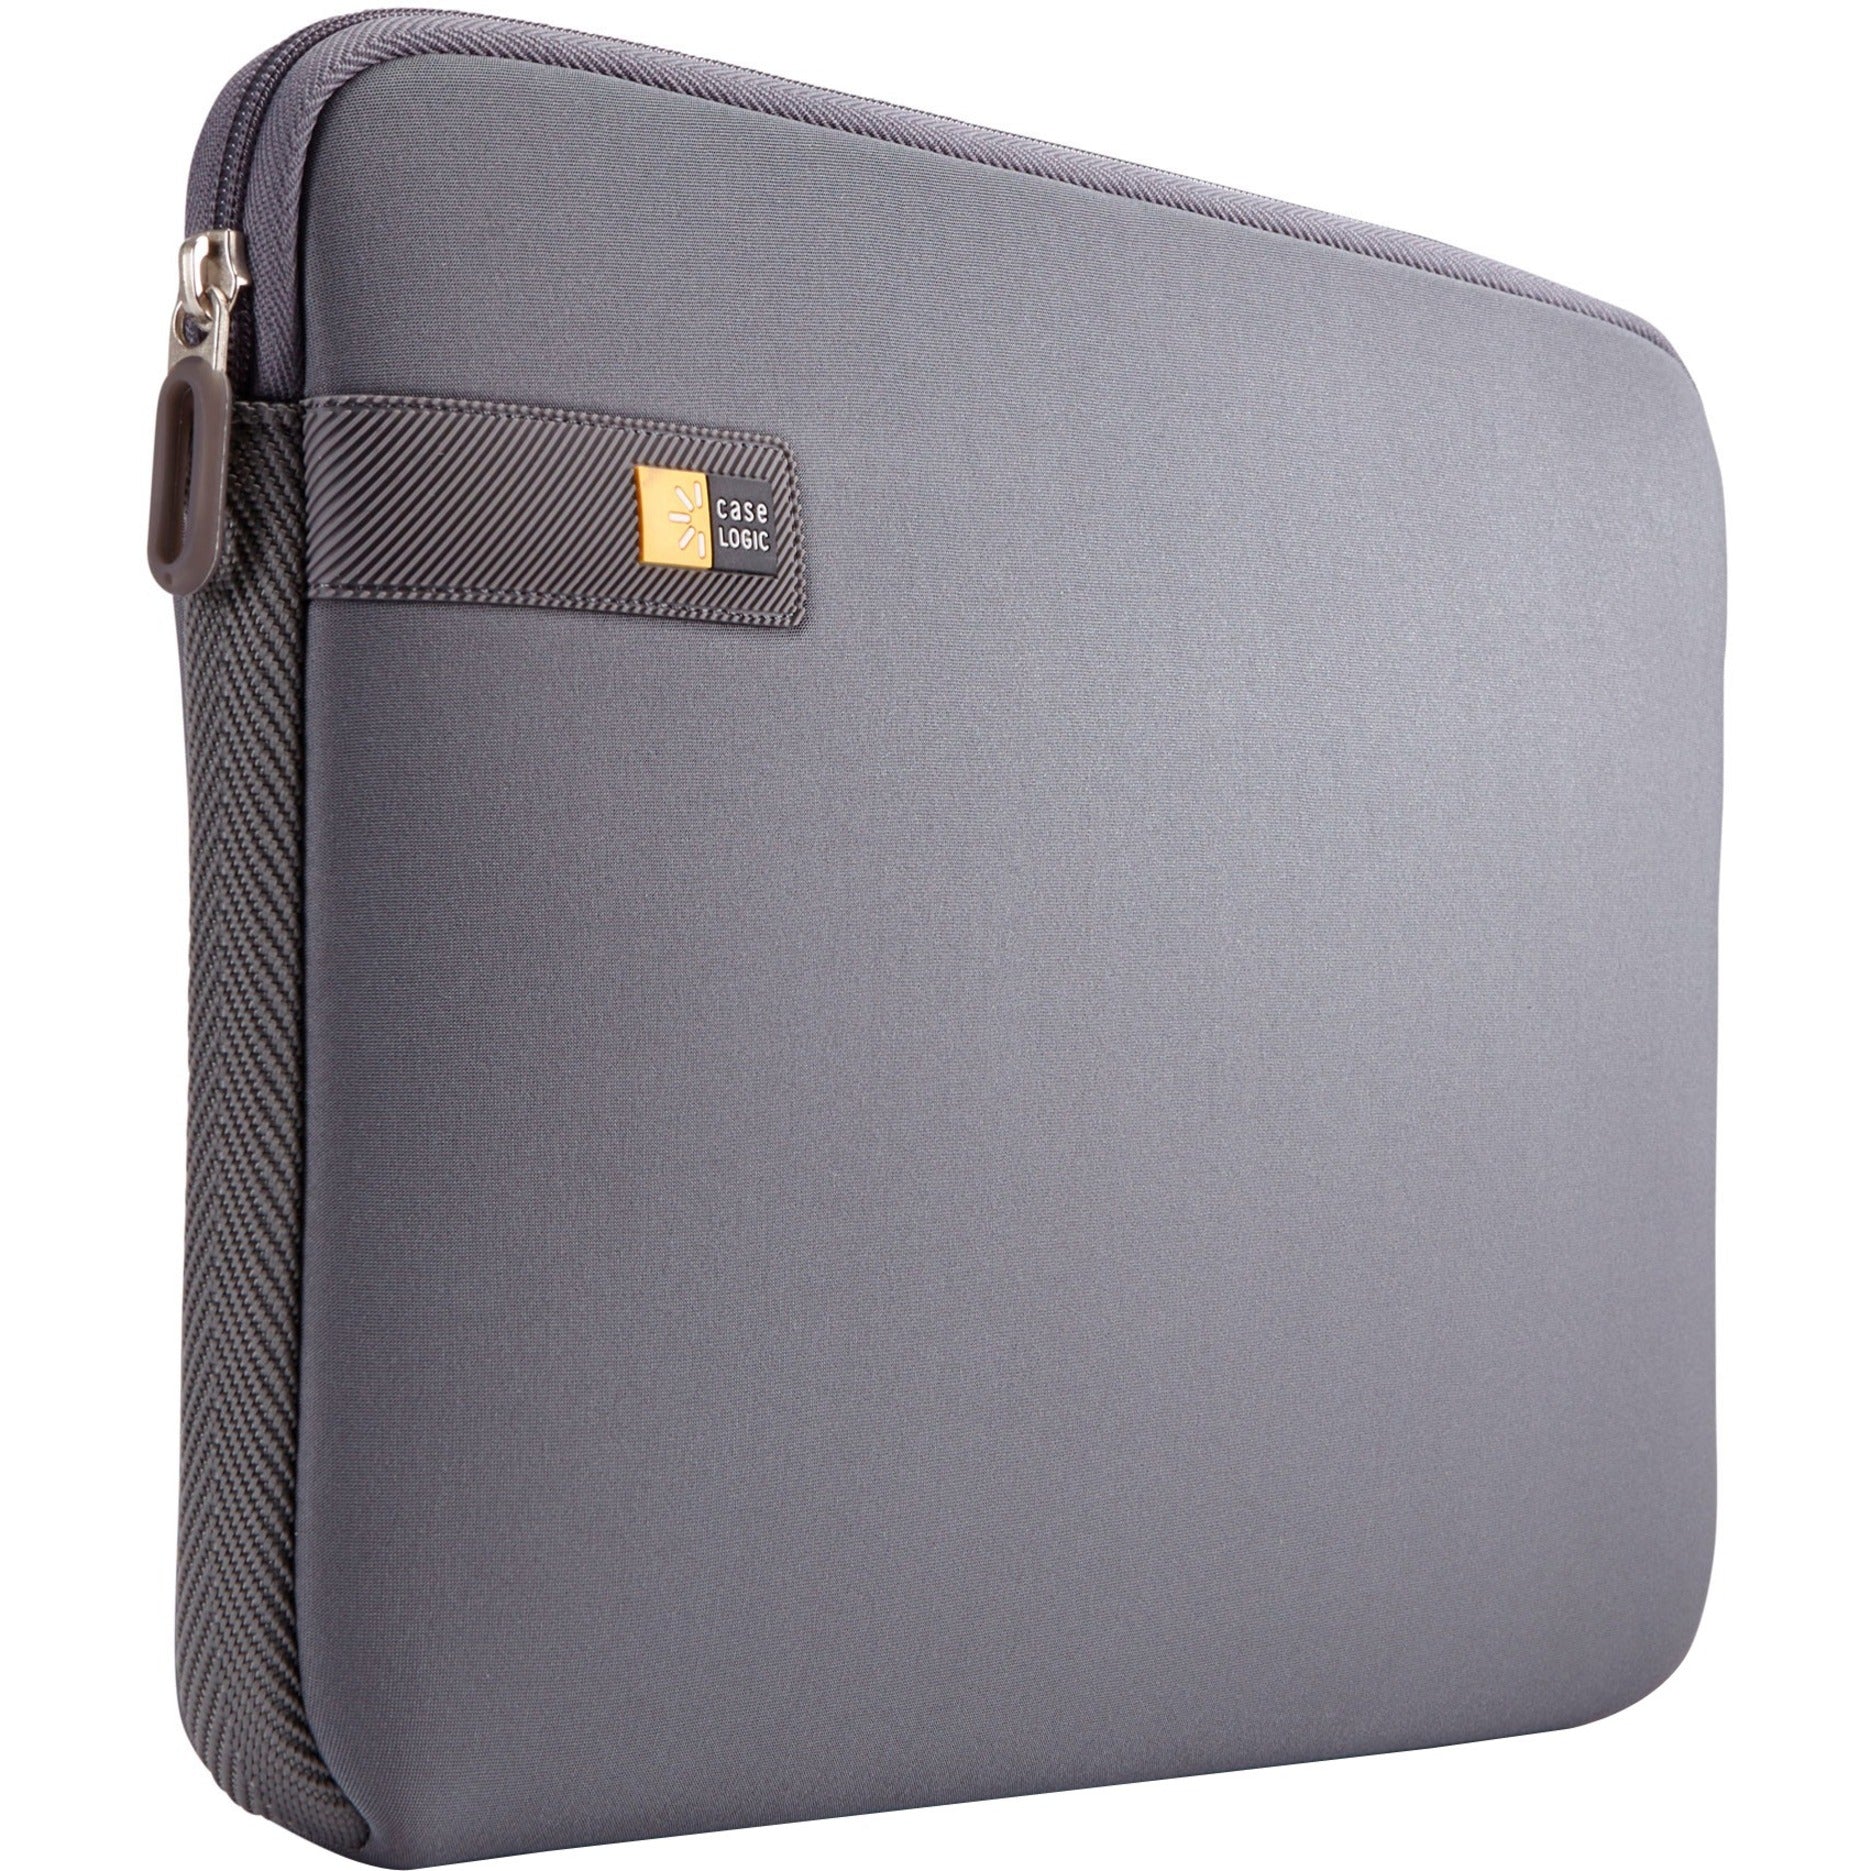 Case Logic 3201352 13.3" Laptop and MacBook Sleeve, Graphite, Lightweight and Protective